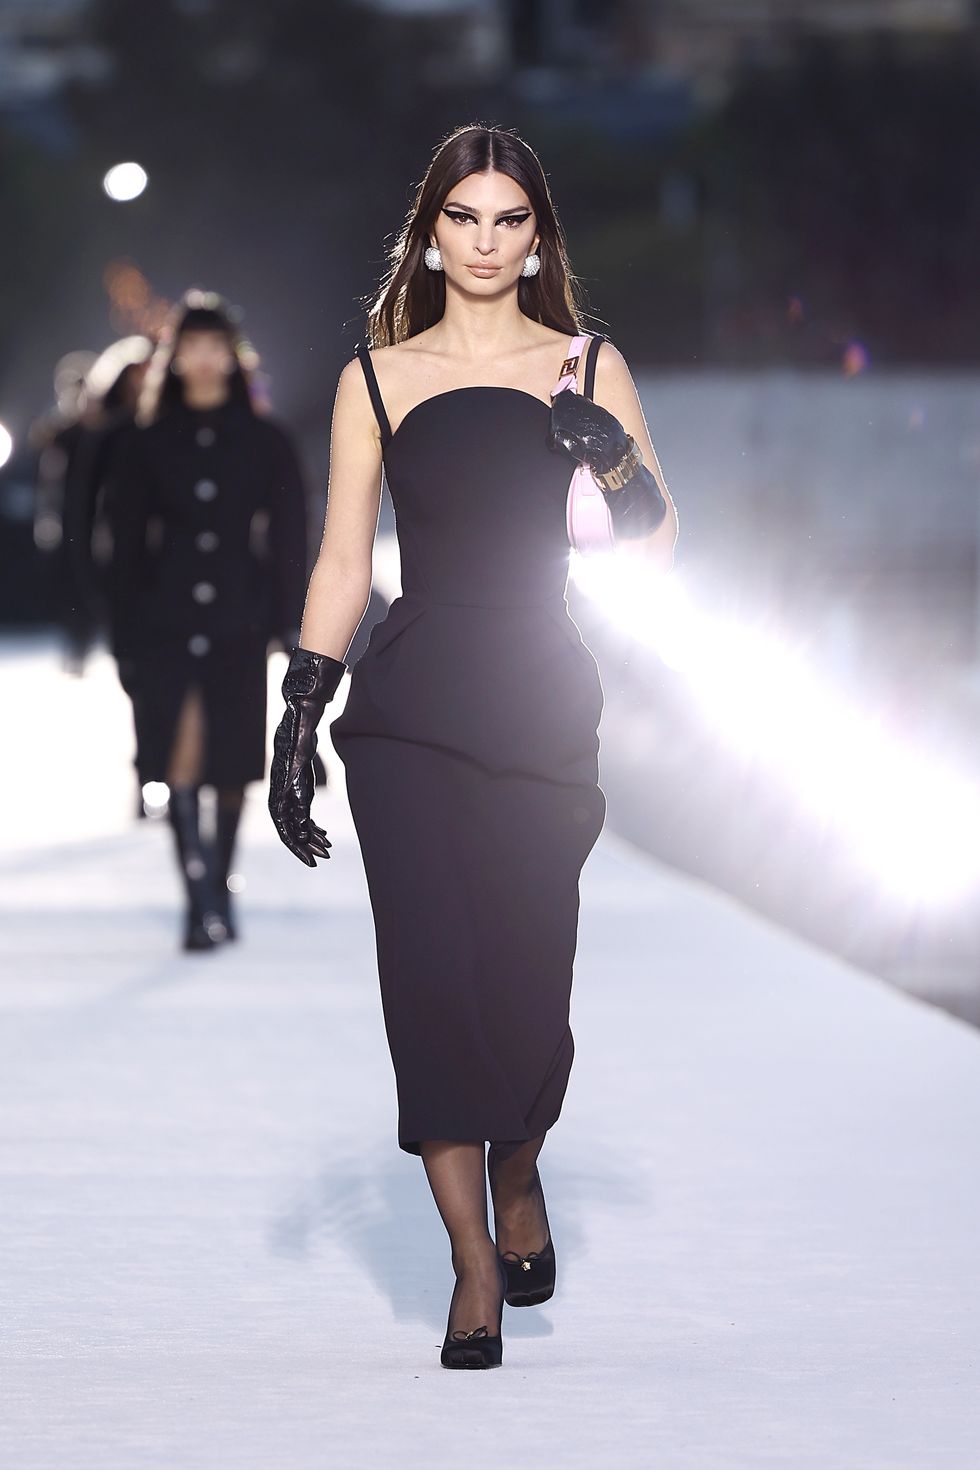 west hollywood, california march 09 emily ratajkowski walks the runway during the versace fw23 show at pacific design center on march 09, 2023 in west hollywood, california photo by arturo holmesgetty images